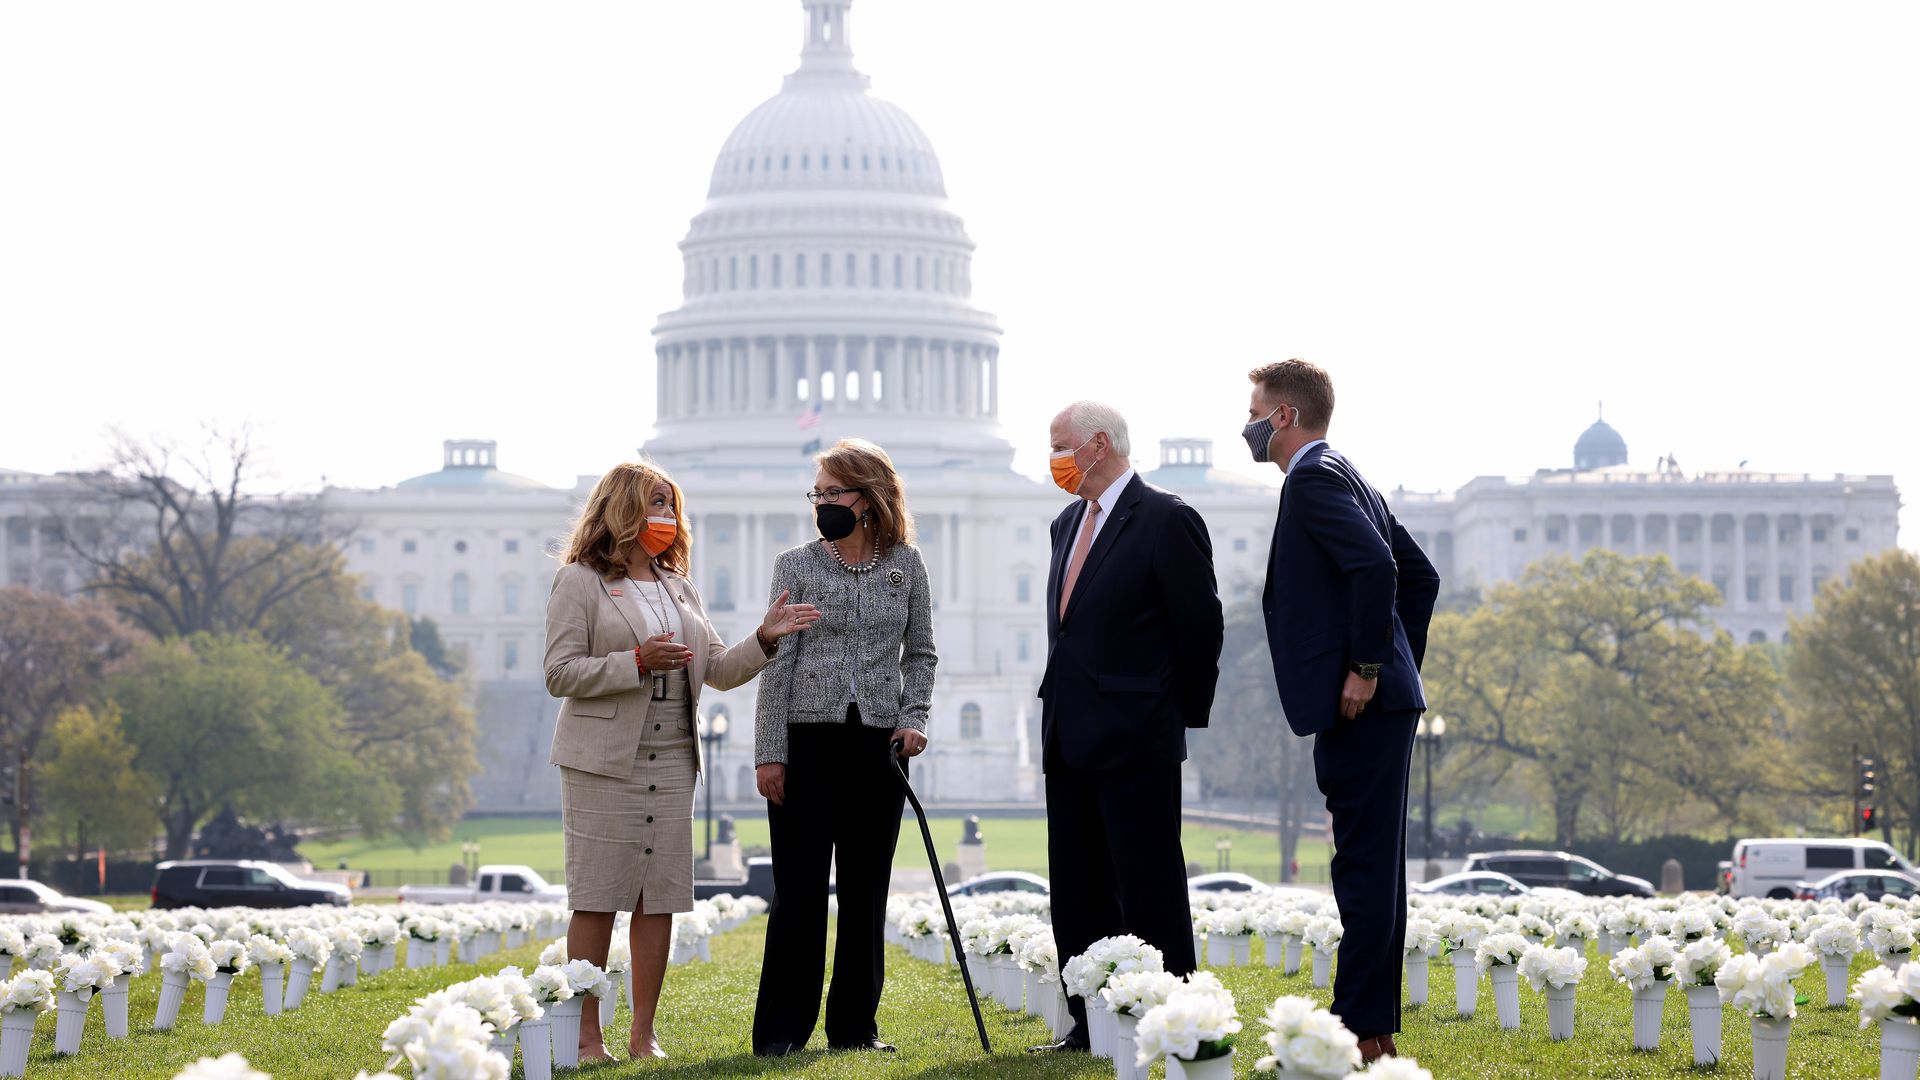 Former Rep. Gabby Giffords is seen standing amid a memorial to shooting victims that was erected on the National Mall.